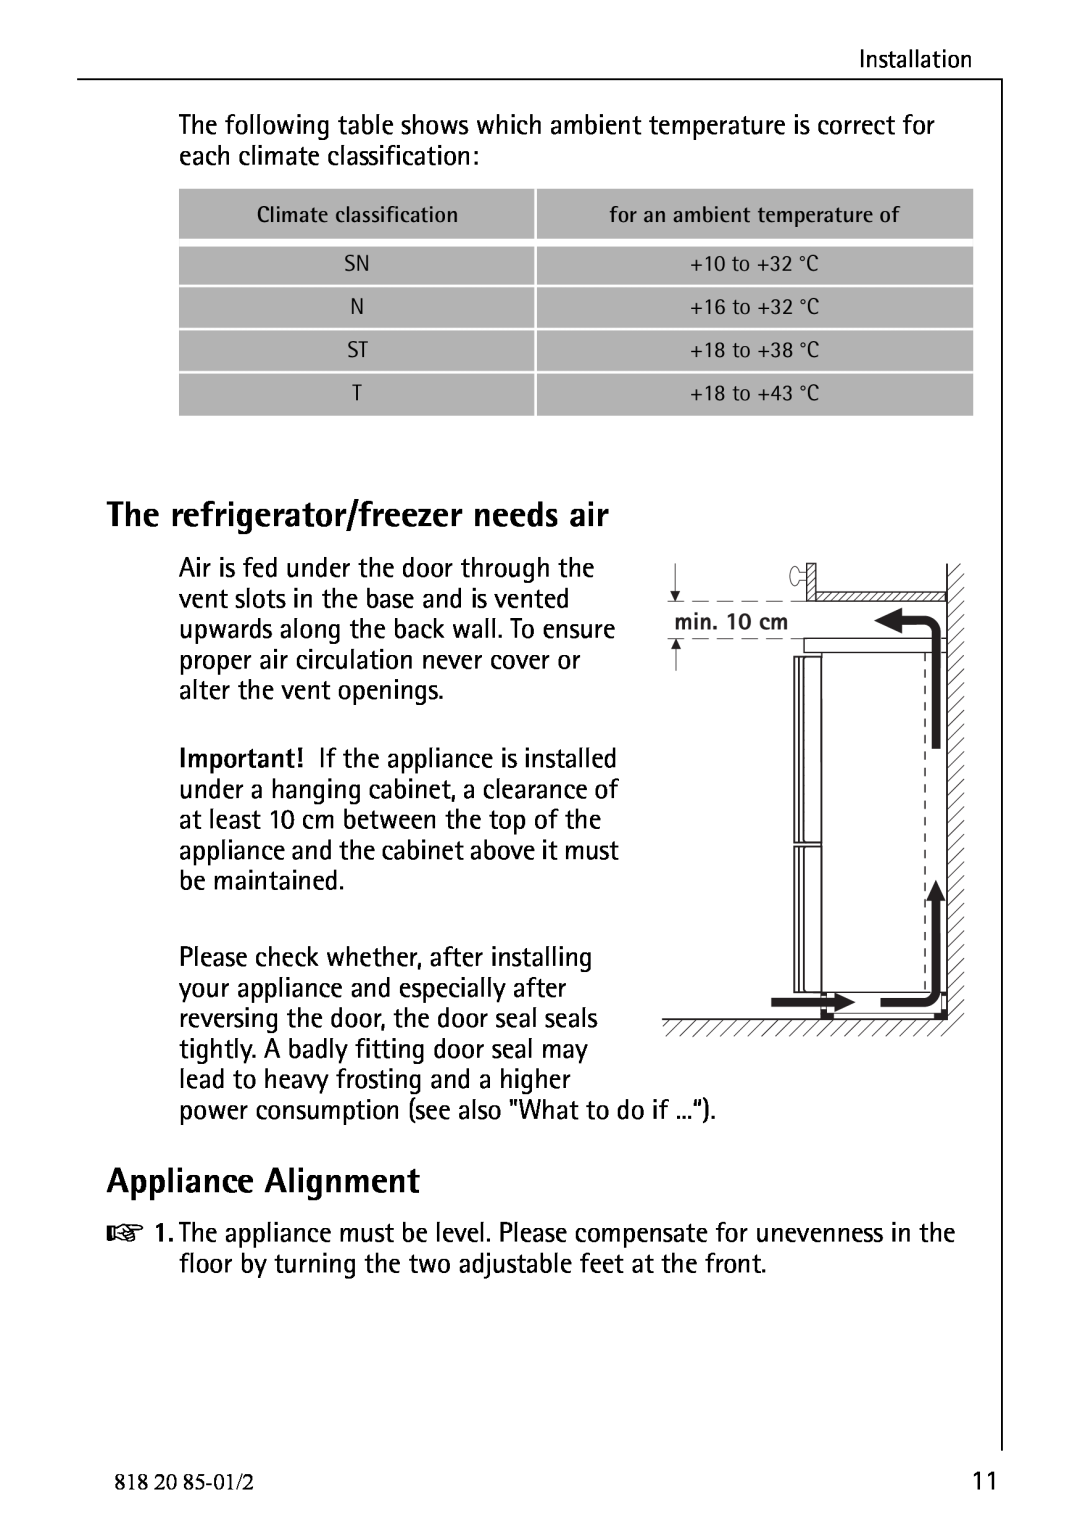 Electrolux 818 20 85 operating instructions The refrigerator/freezer needs air, Appliance Alignment 